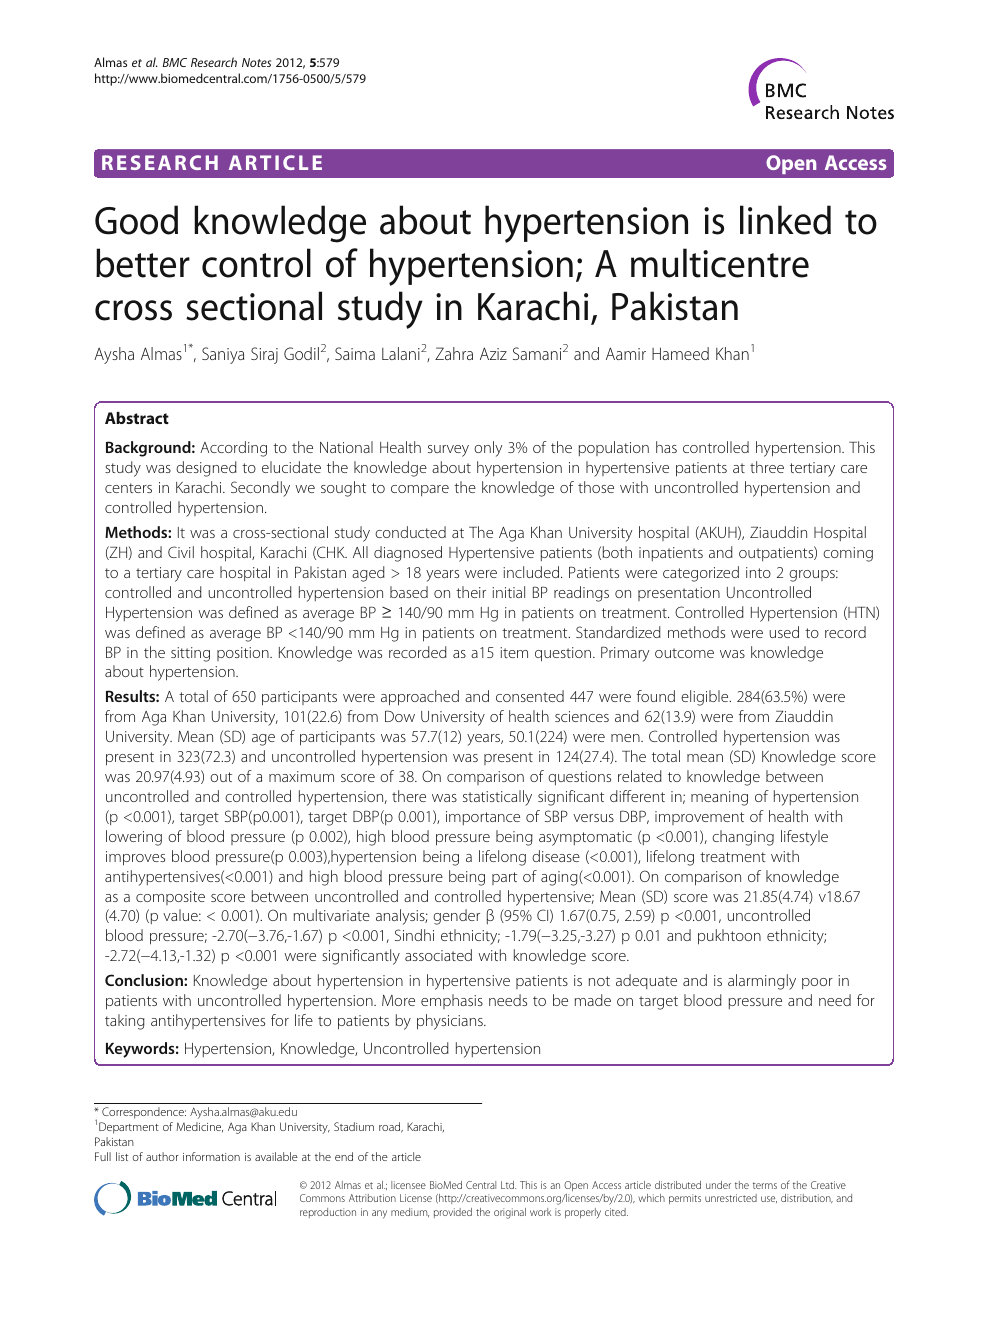 Good Knowledge About Hypertension Is Linked To Better Control Of